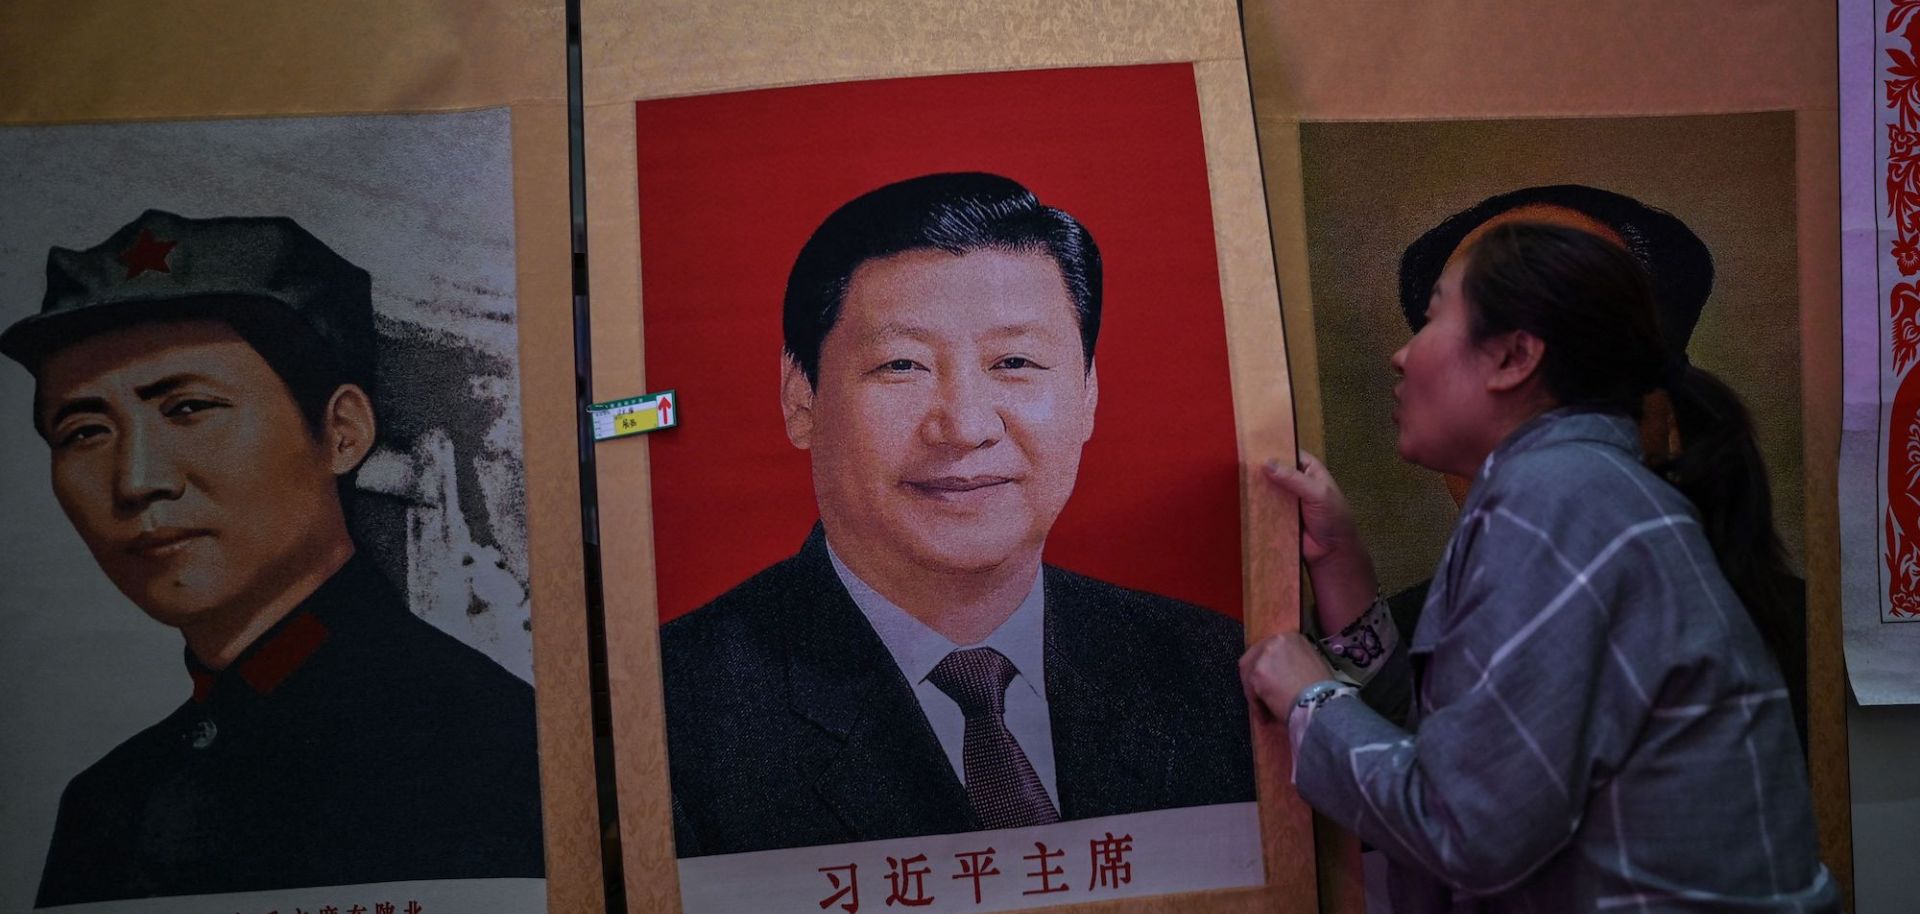 This picture taken during a government organised media tour shows a seller holding a portrait of the Chinese President Xi Jinping next to a picture of the former Chinese leader Mao Zedong at Dongfanghong Theatre in Yan'an, the headquarters of the Chinese Communist Party from 1936 to 1947, in Shaanxi province on May 10, 2021, ahead of the 100th year of the party's founding in July. 